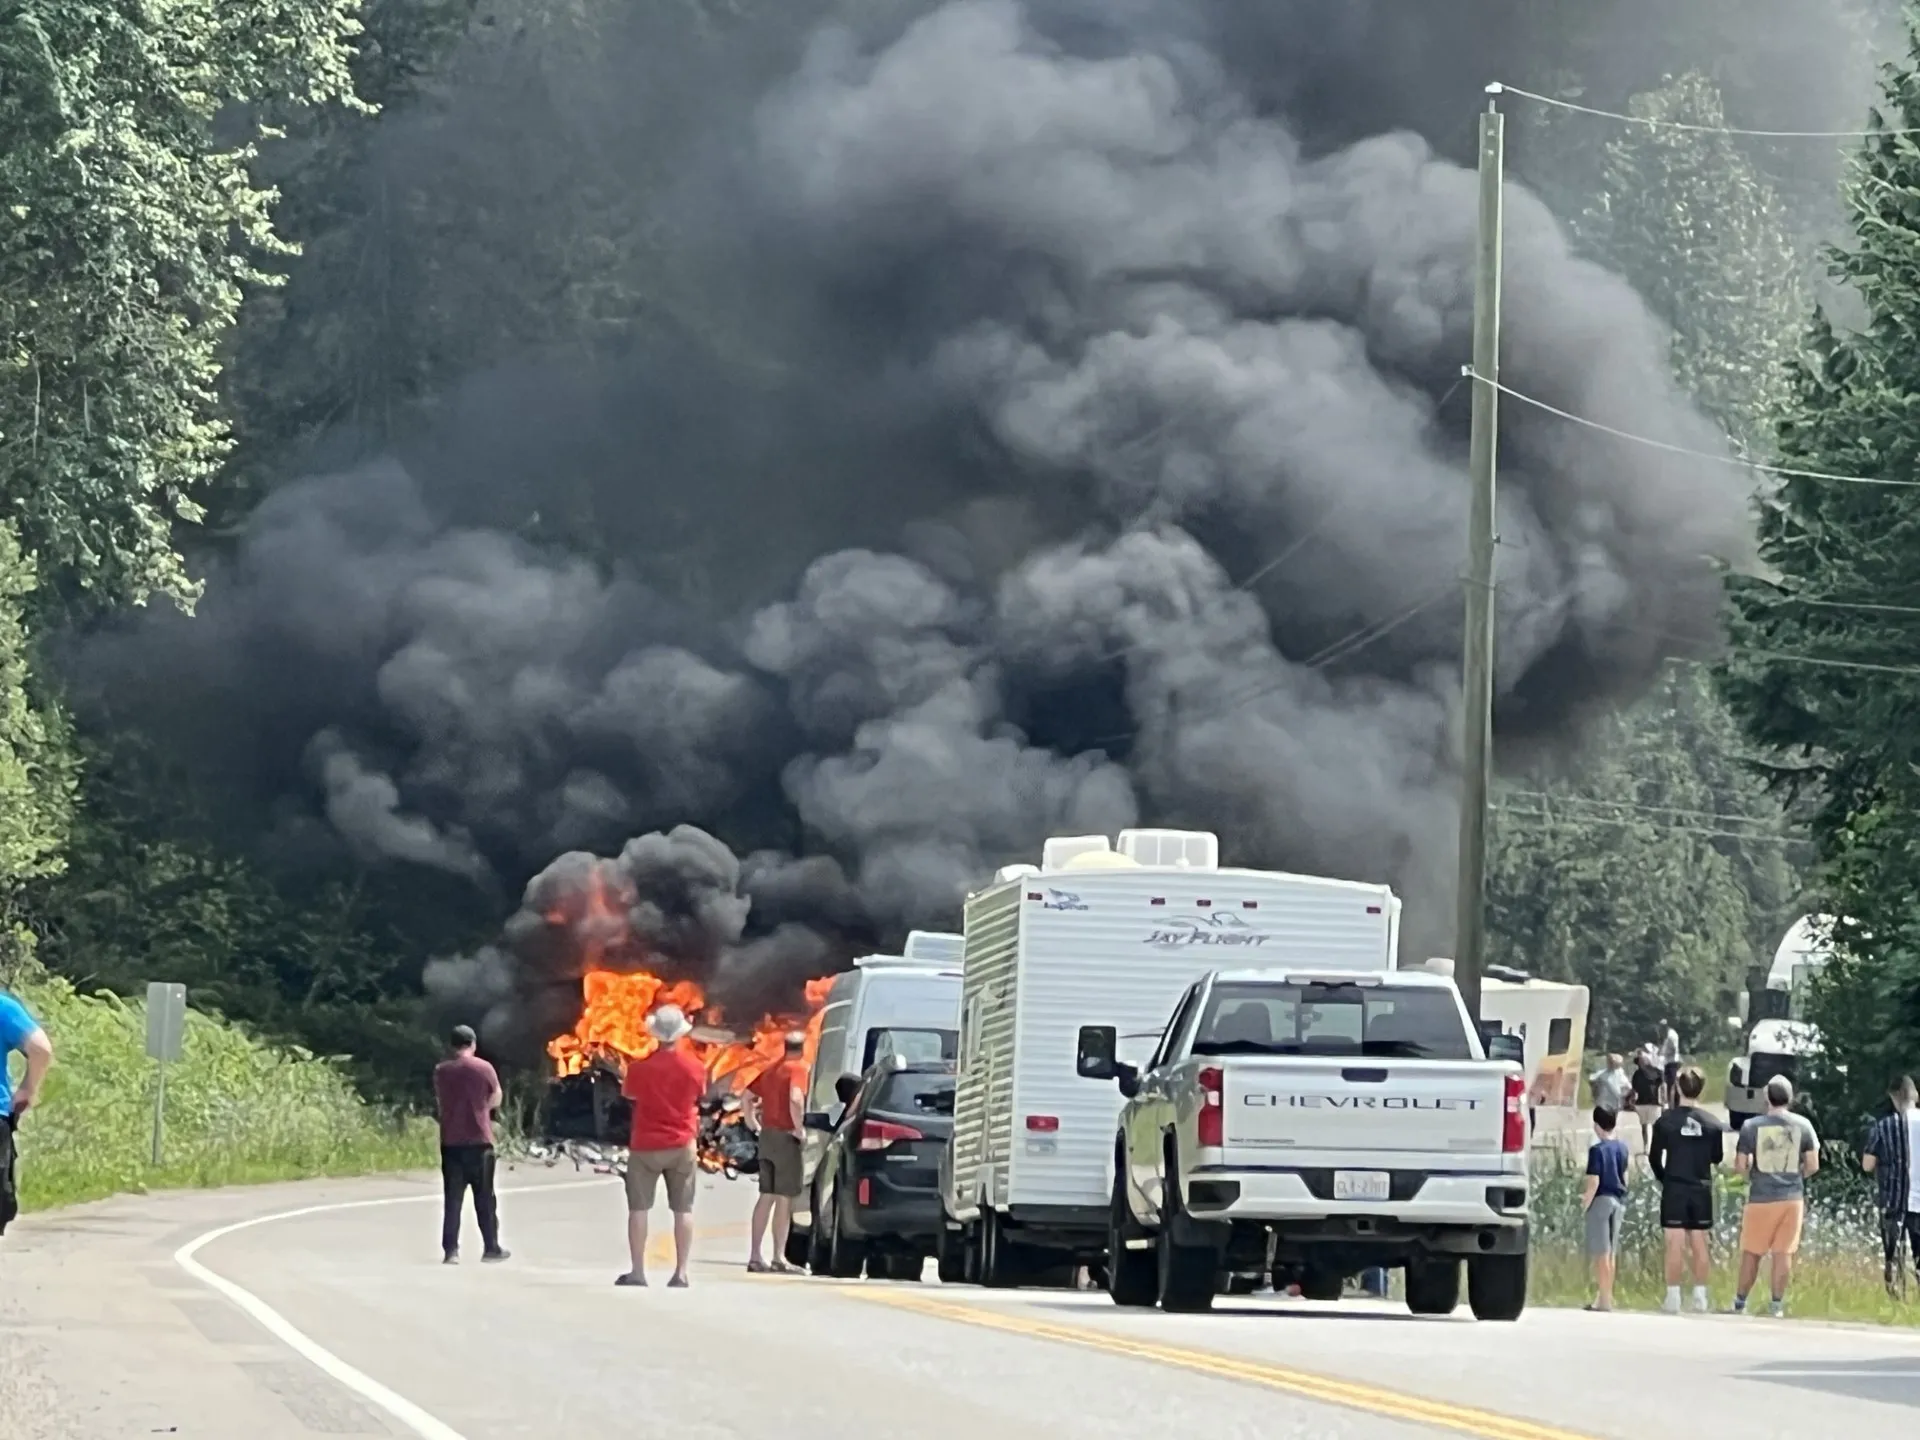 Revelstoke accident today, crash reported at british columbia 1 highway, BC